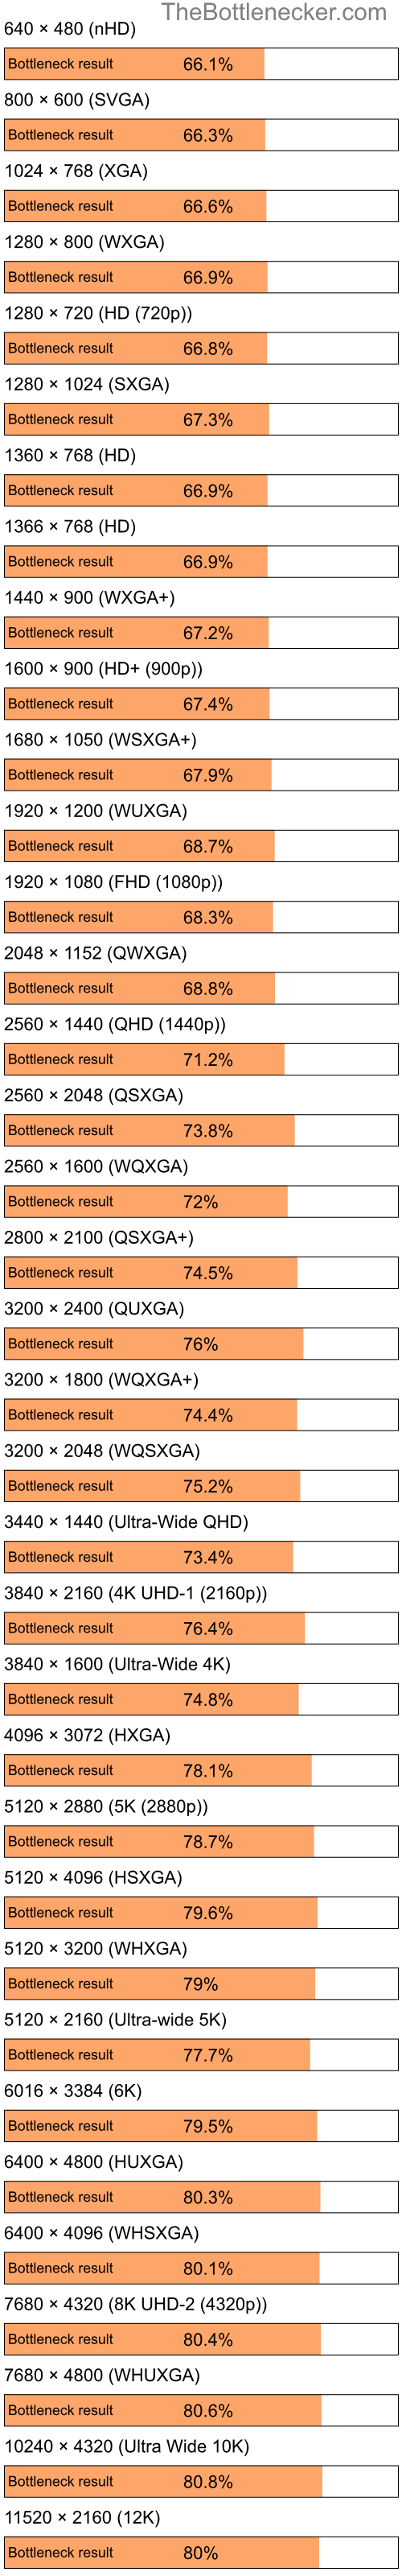 Bottleneck results by resolution for Intel Atom Z520 and NVIDIA GeForce 9300M G in7 Days to Die